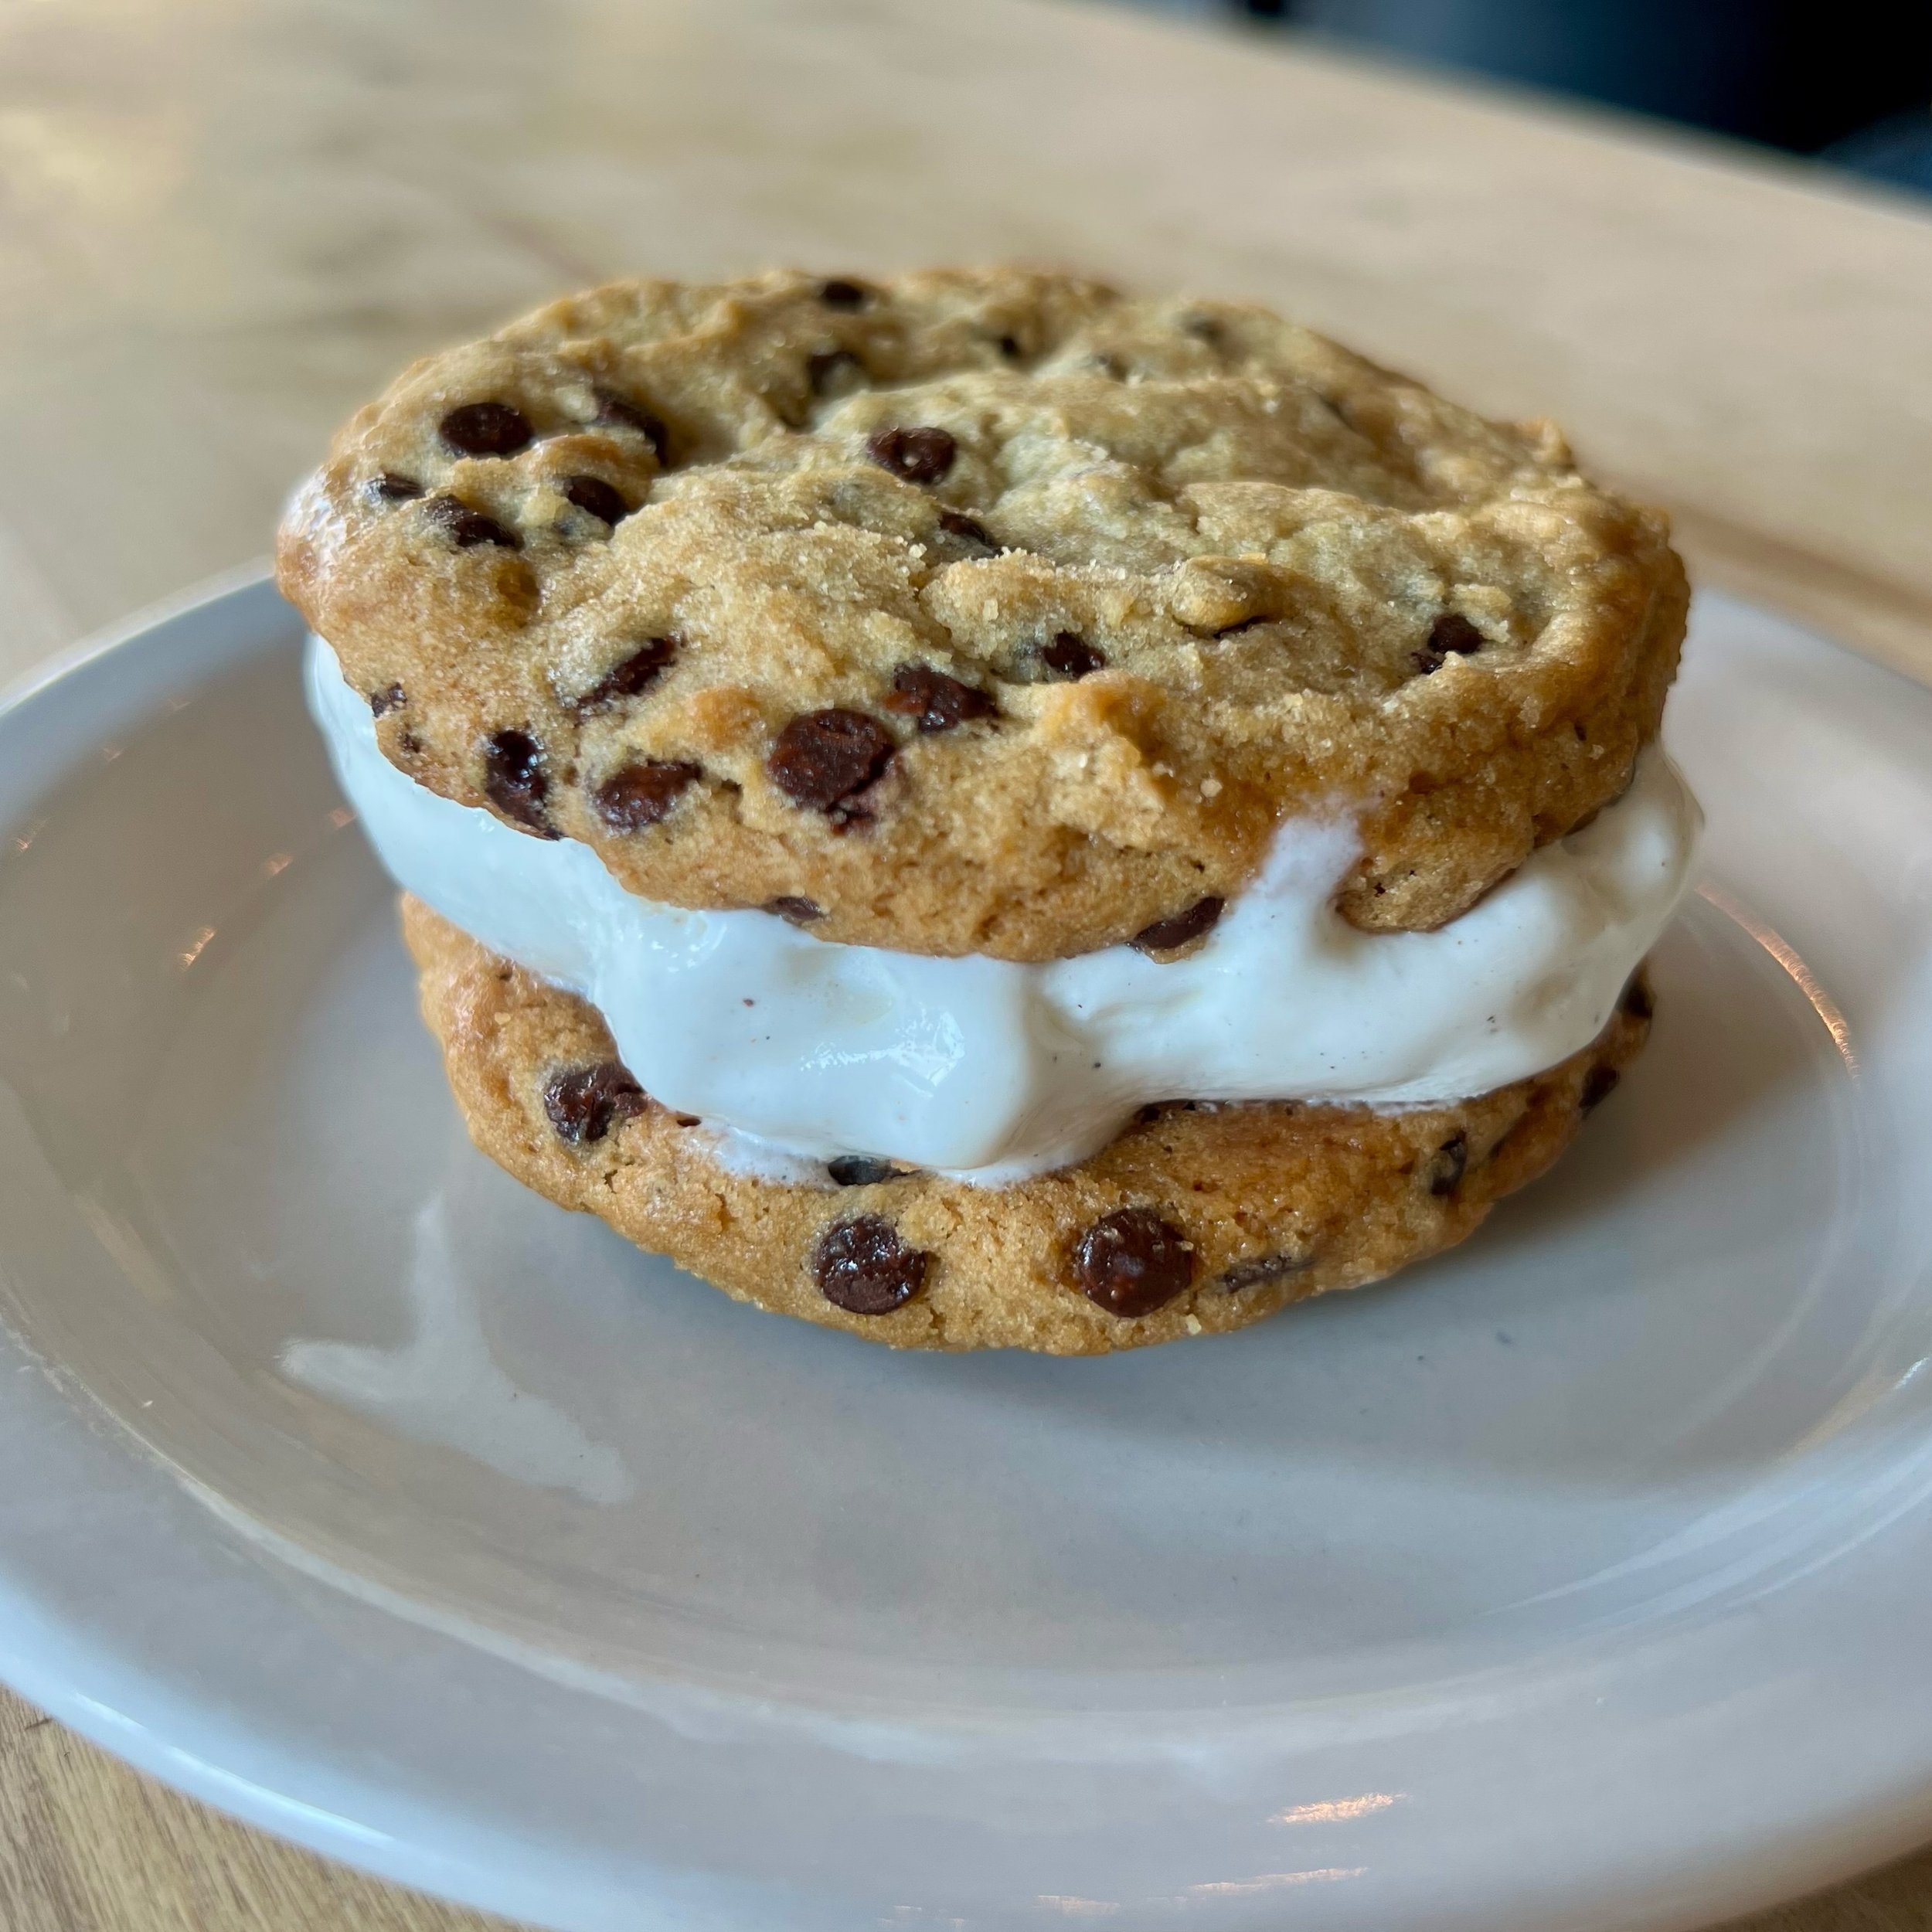 A chocolate chip cookie ice cream sando is *always* a good idea 🍪 Cookies made in house from scratch!